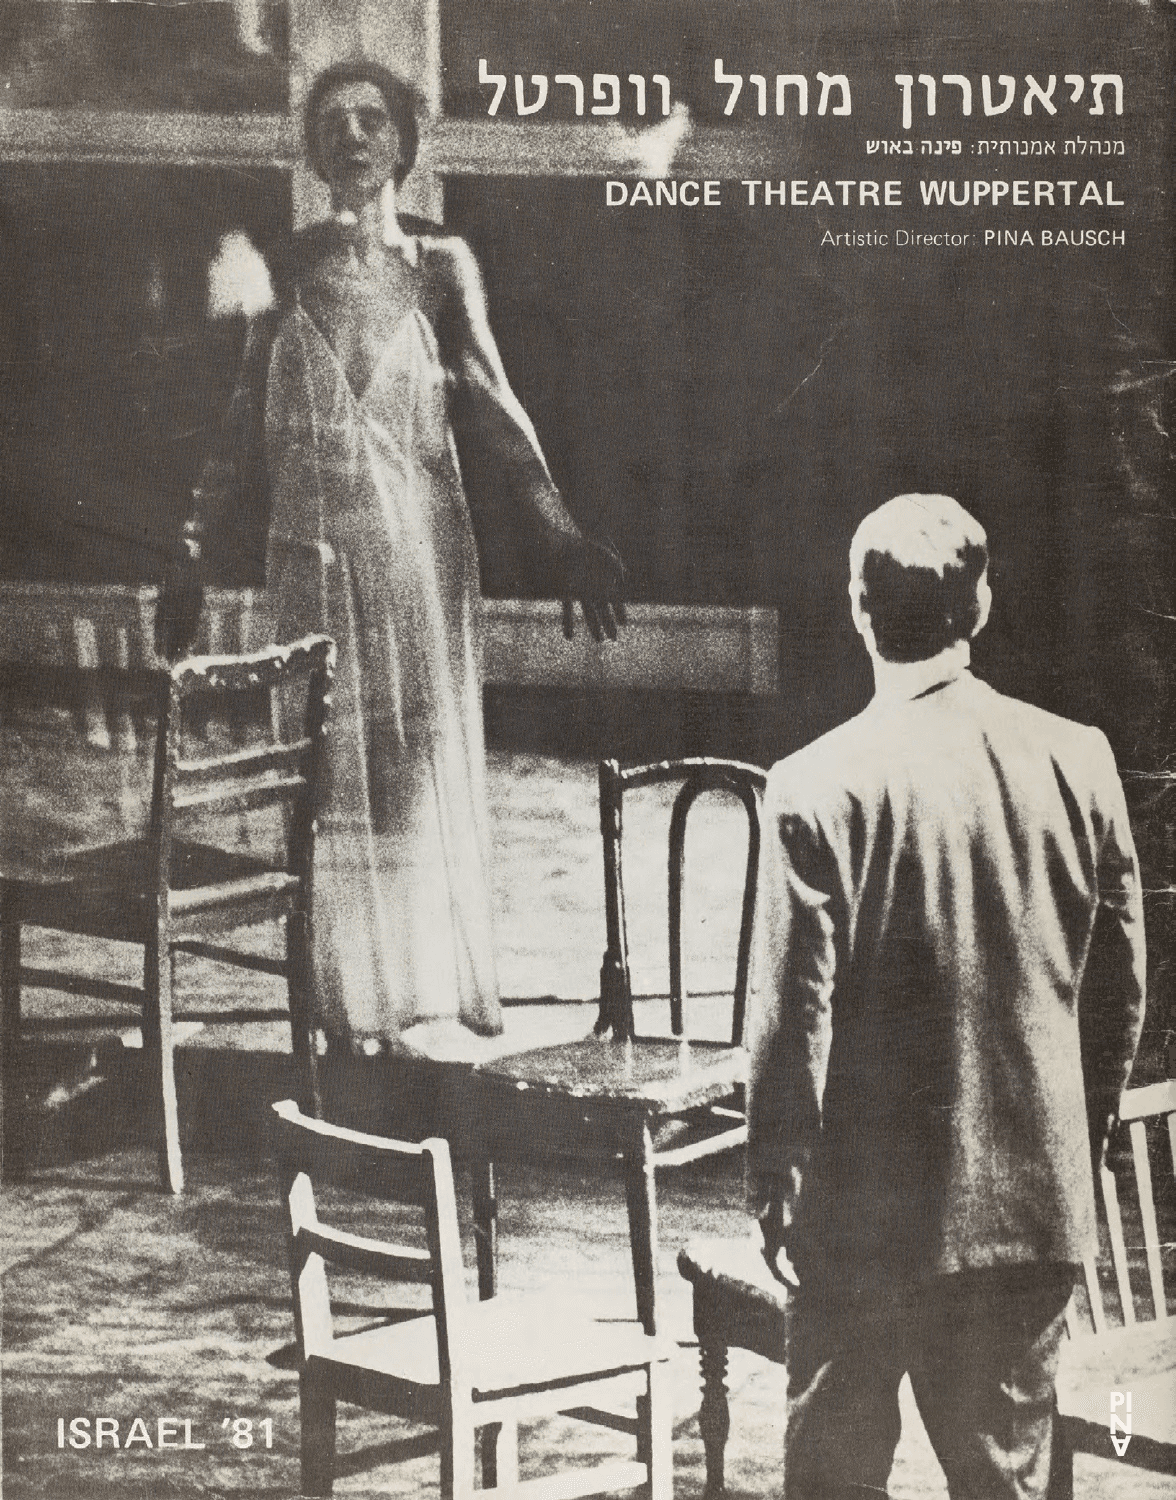 Booklet for “Café Müller”, “The Second Spring” and “The Rite of Spring” by Pina Bausch with Tanztheater Wuppertal in in Ein HaShofet, Haifa, Jerusalem and Tel Aviv, 05/12/1981 – 05/22/1981